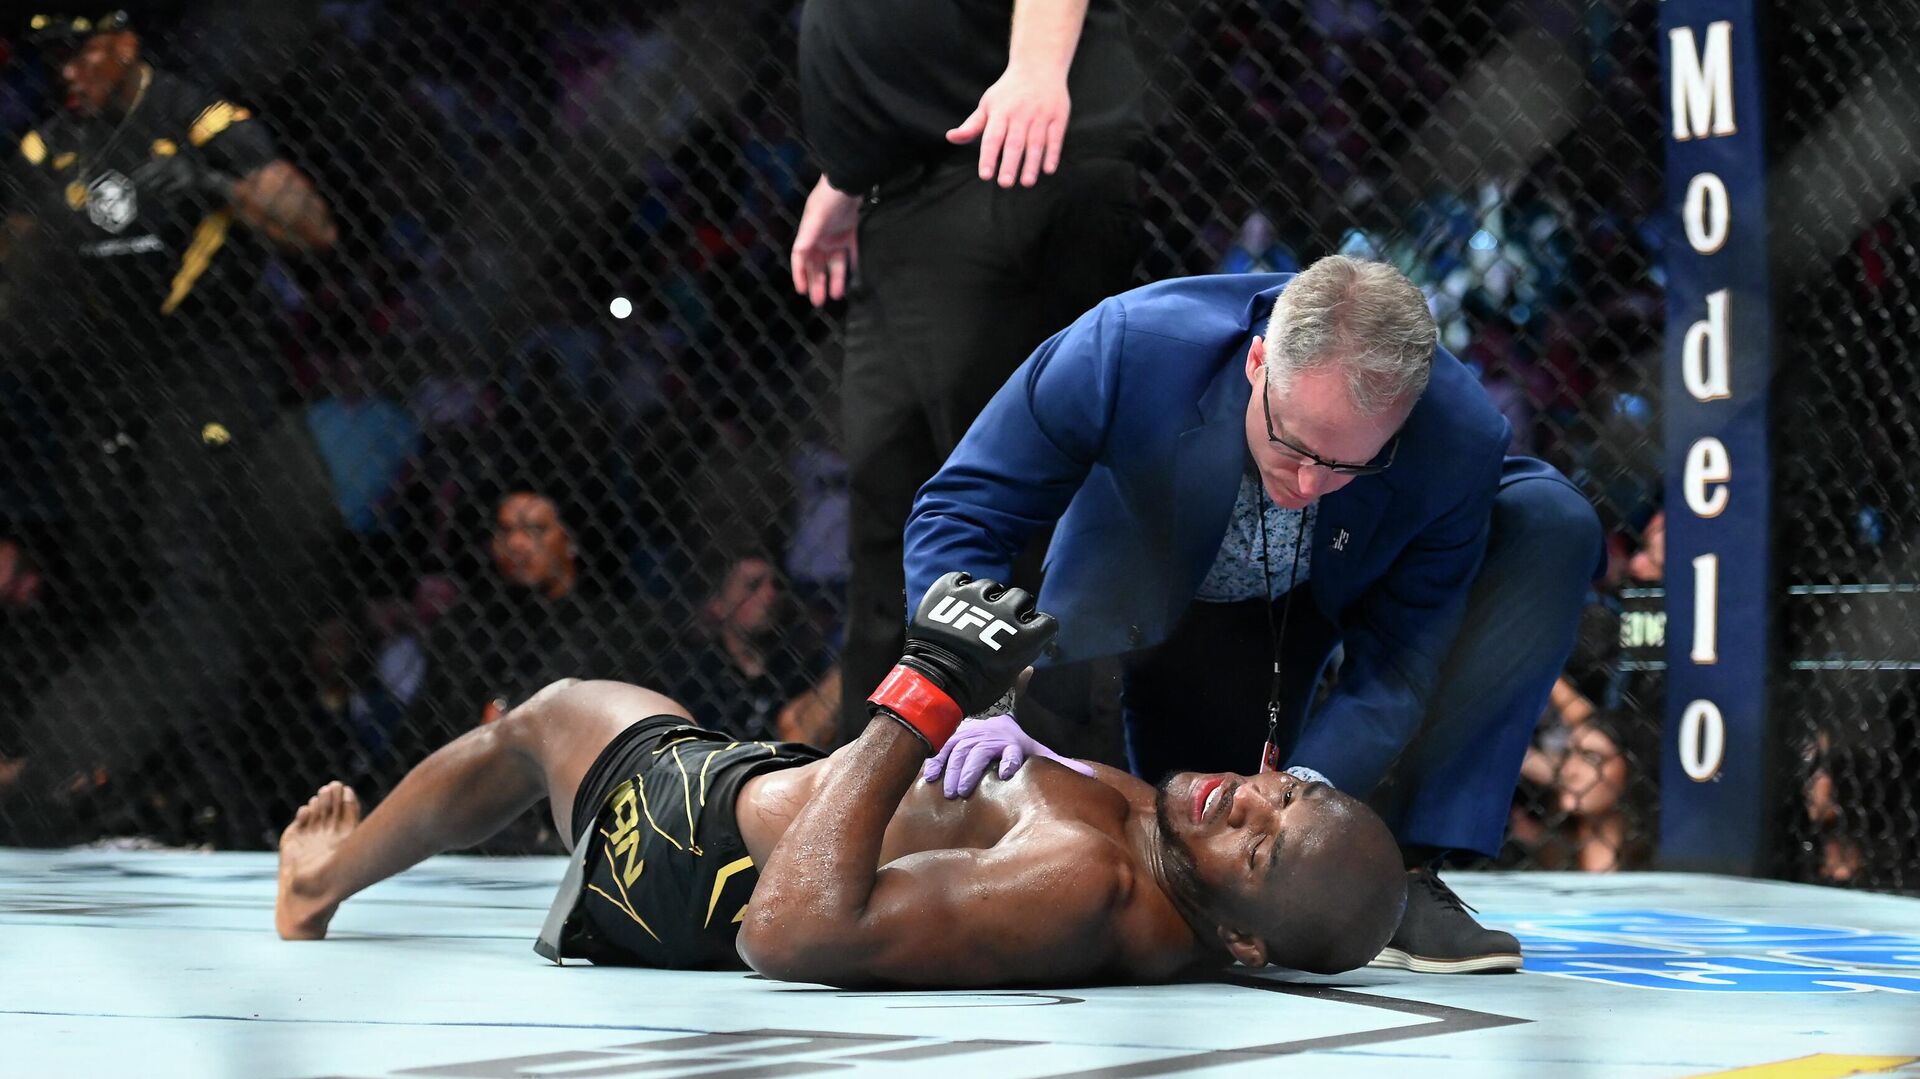 UFC fighter Kamaru Usman after knockout defeat - news from Russia today